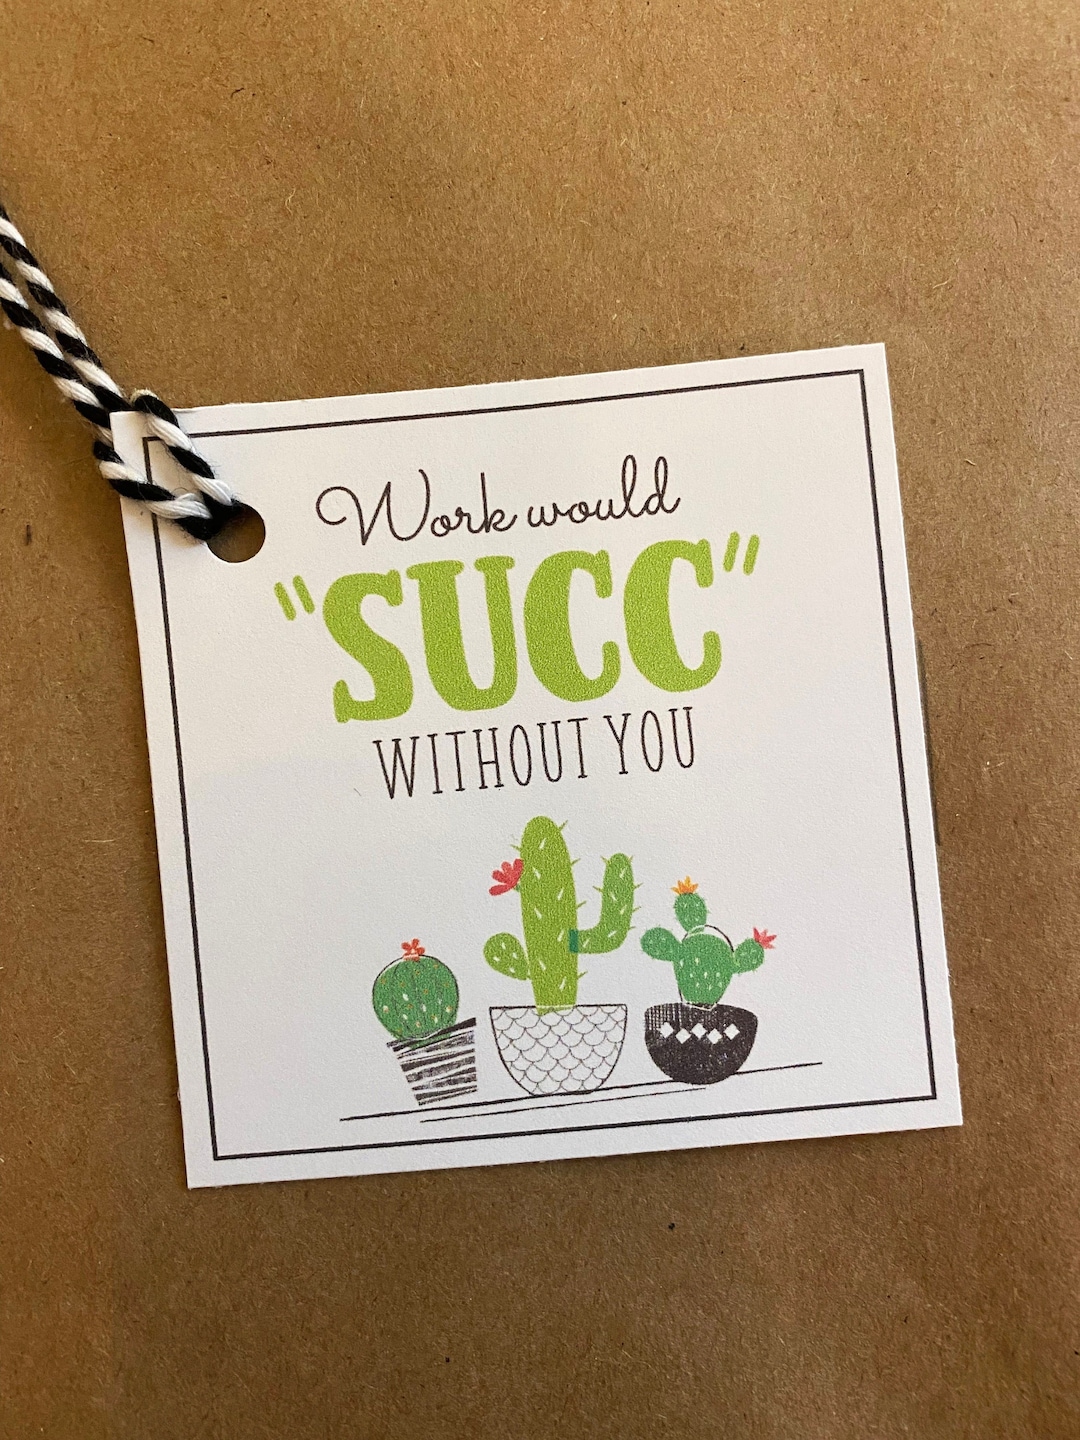 work-would-succ-without-you-succulent-gift-tag-printable-cactus-gift